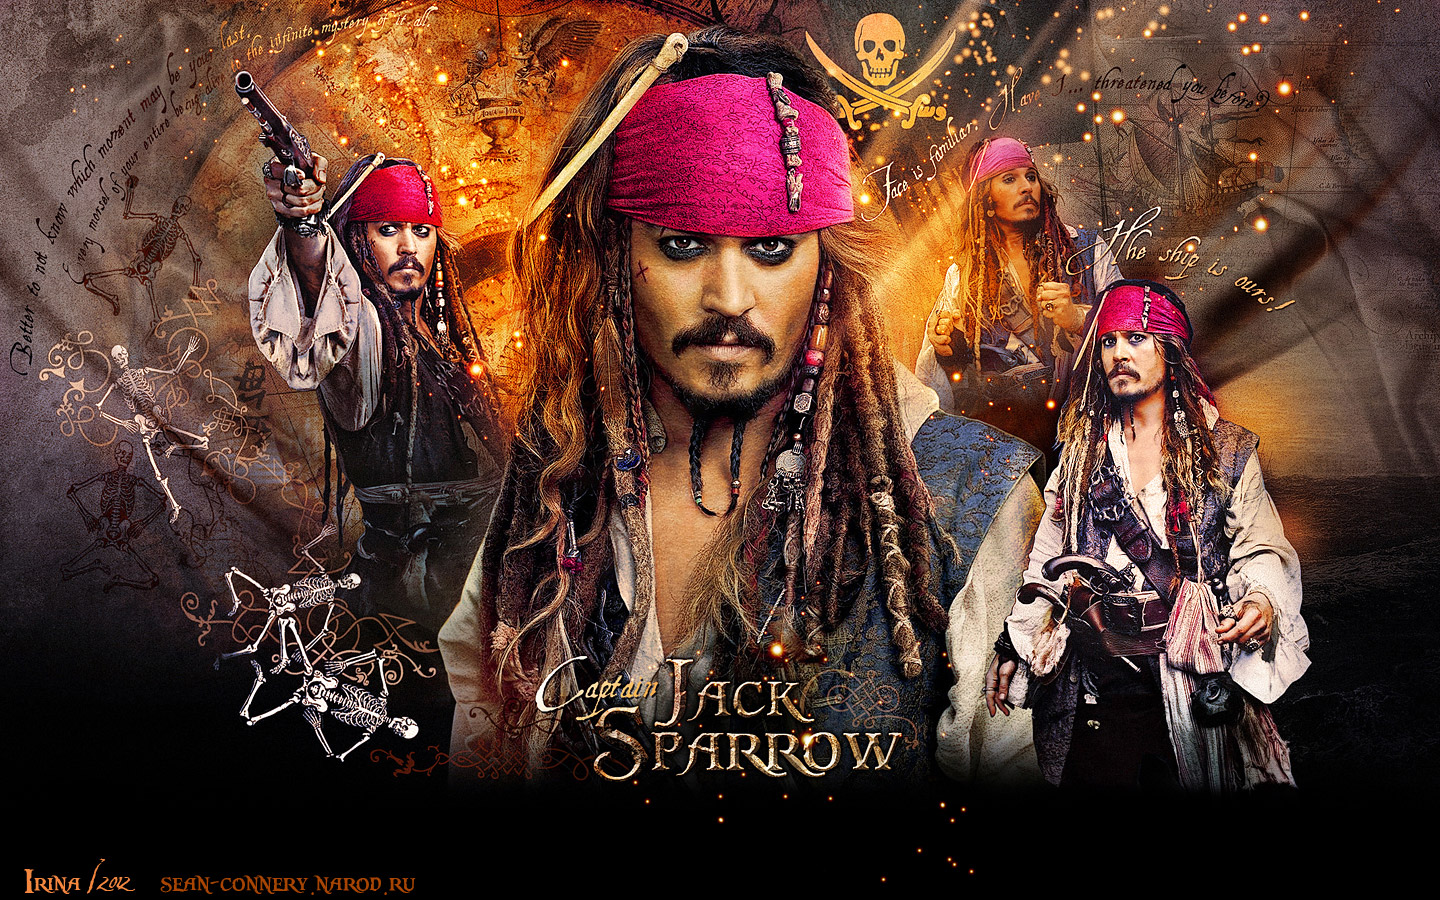 Wallpaper ID 346358  Movie Pirates Of The Caribbean Dead Mans Chest  Phone Wallpaper Johnny Depp Jack Sparrow 1125x2436 free download